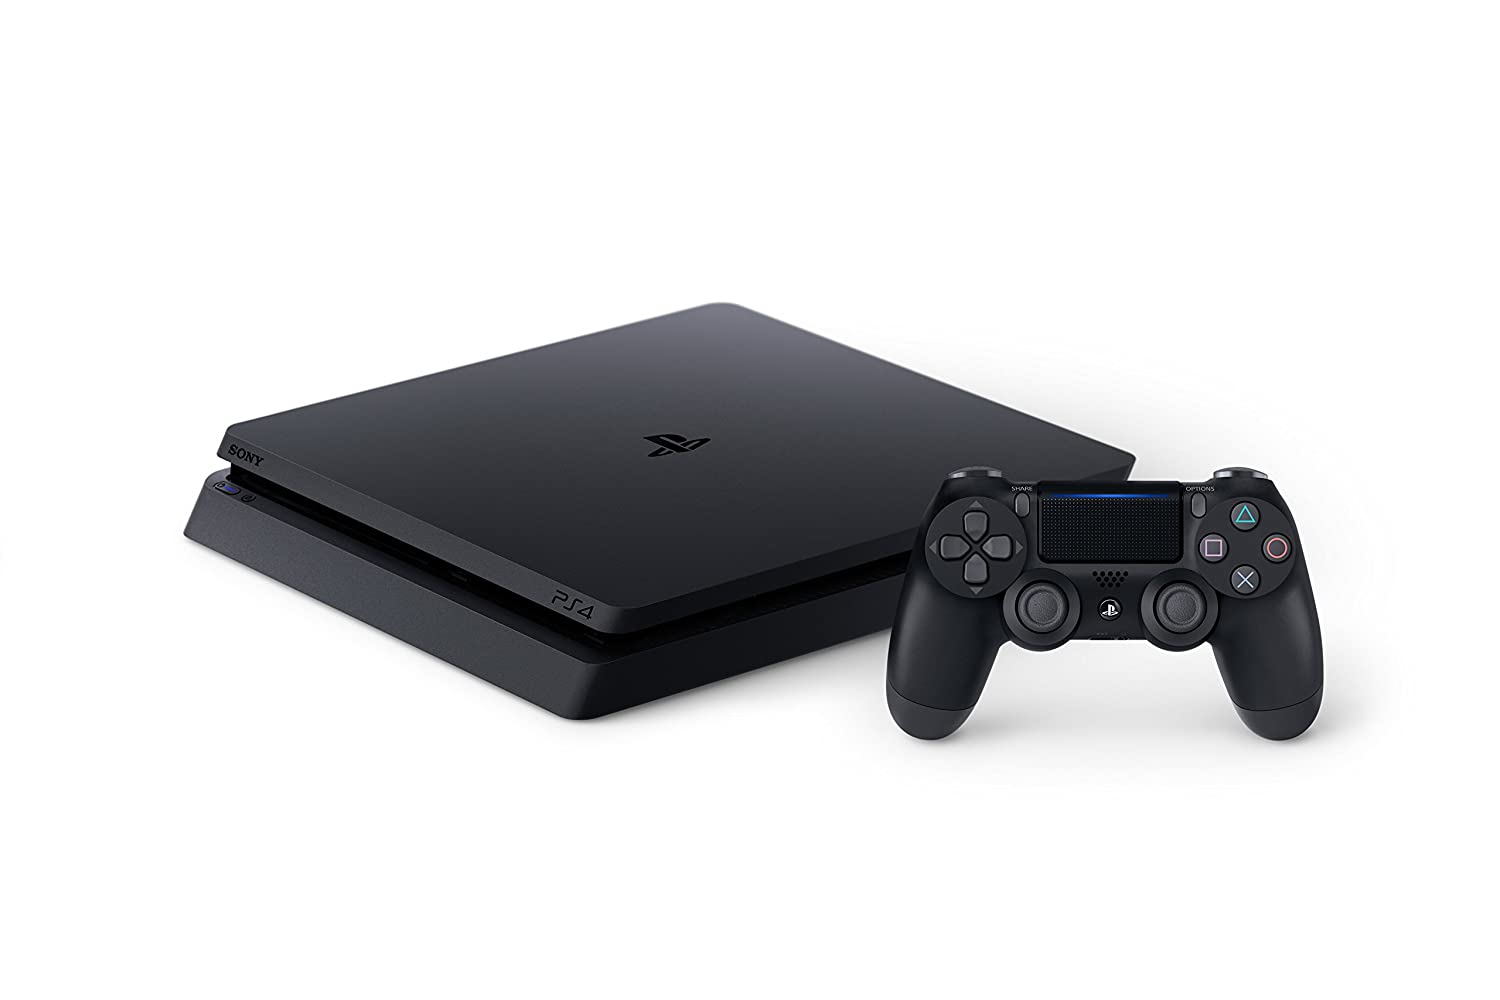 Sony says it is not increasing PS4 production to deal with the current PS5 shortage - VG247